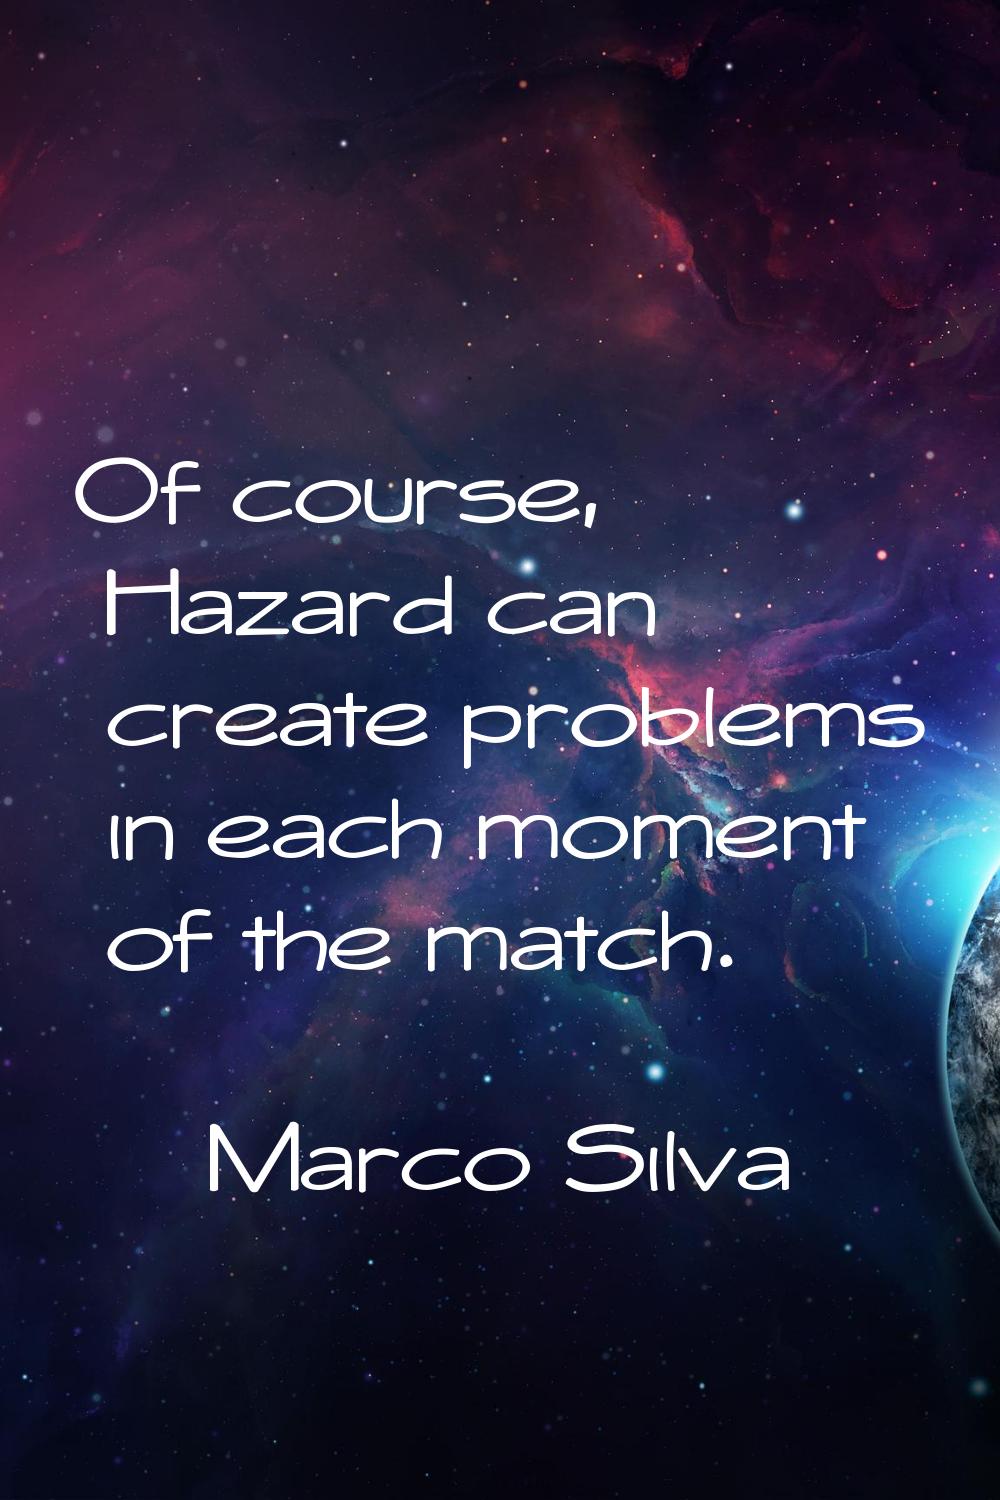 Of course, Hazard can create problems in each moment of the match.